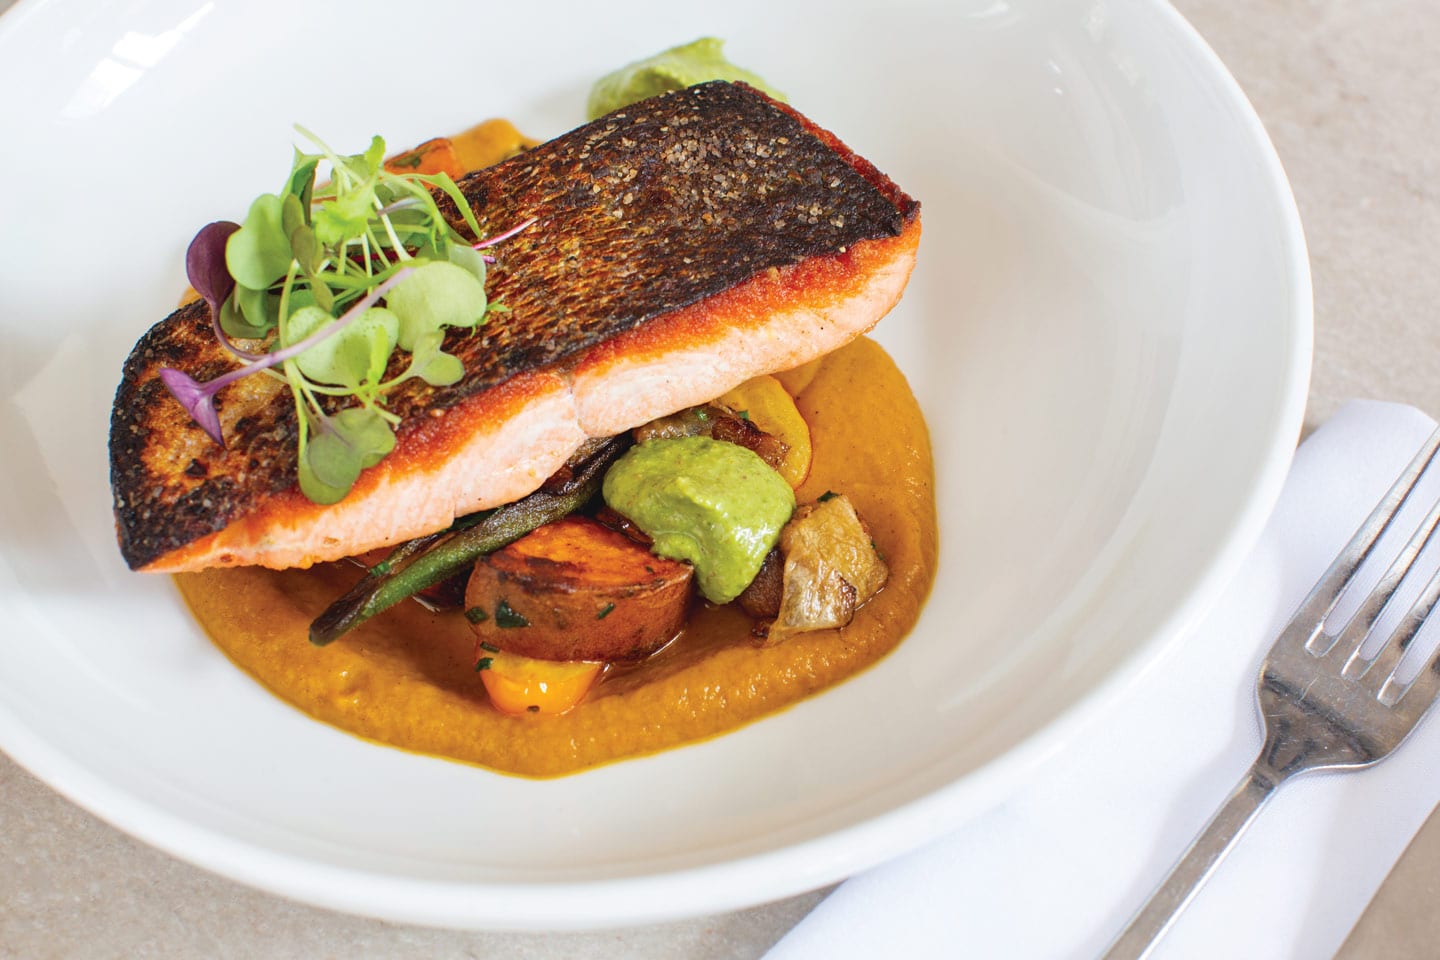 seared wild salmon with sweet potato curry from St. John's Restaurant in Chattanooga